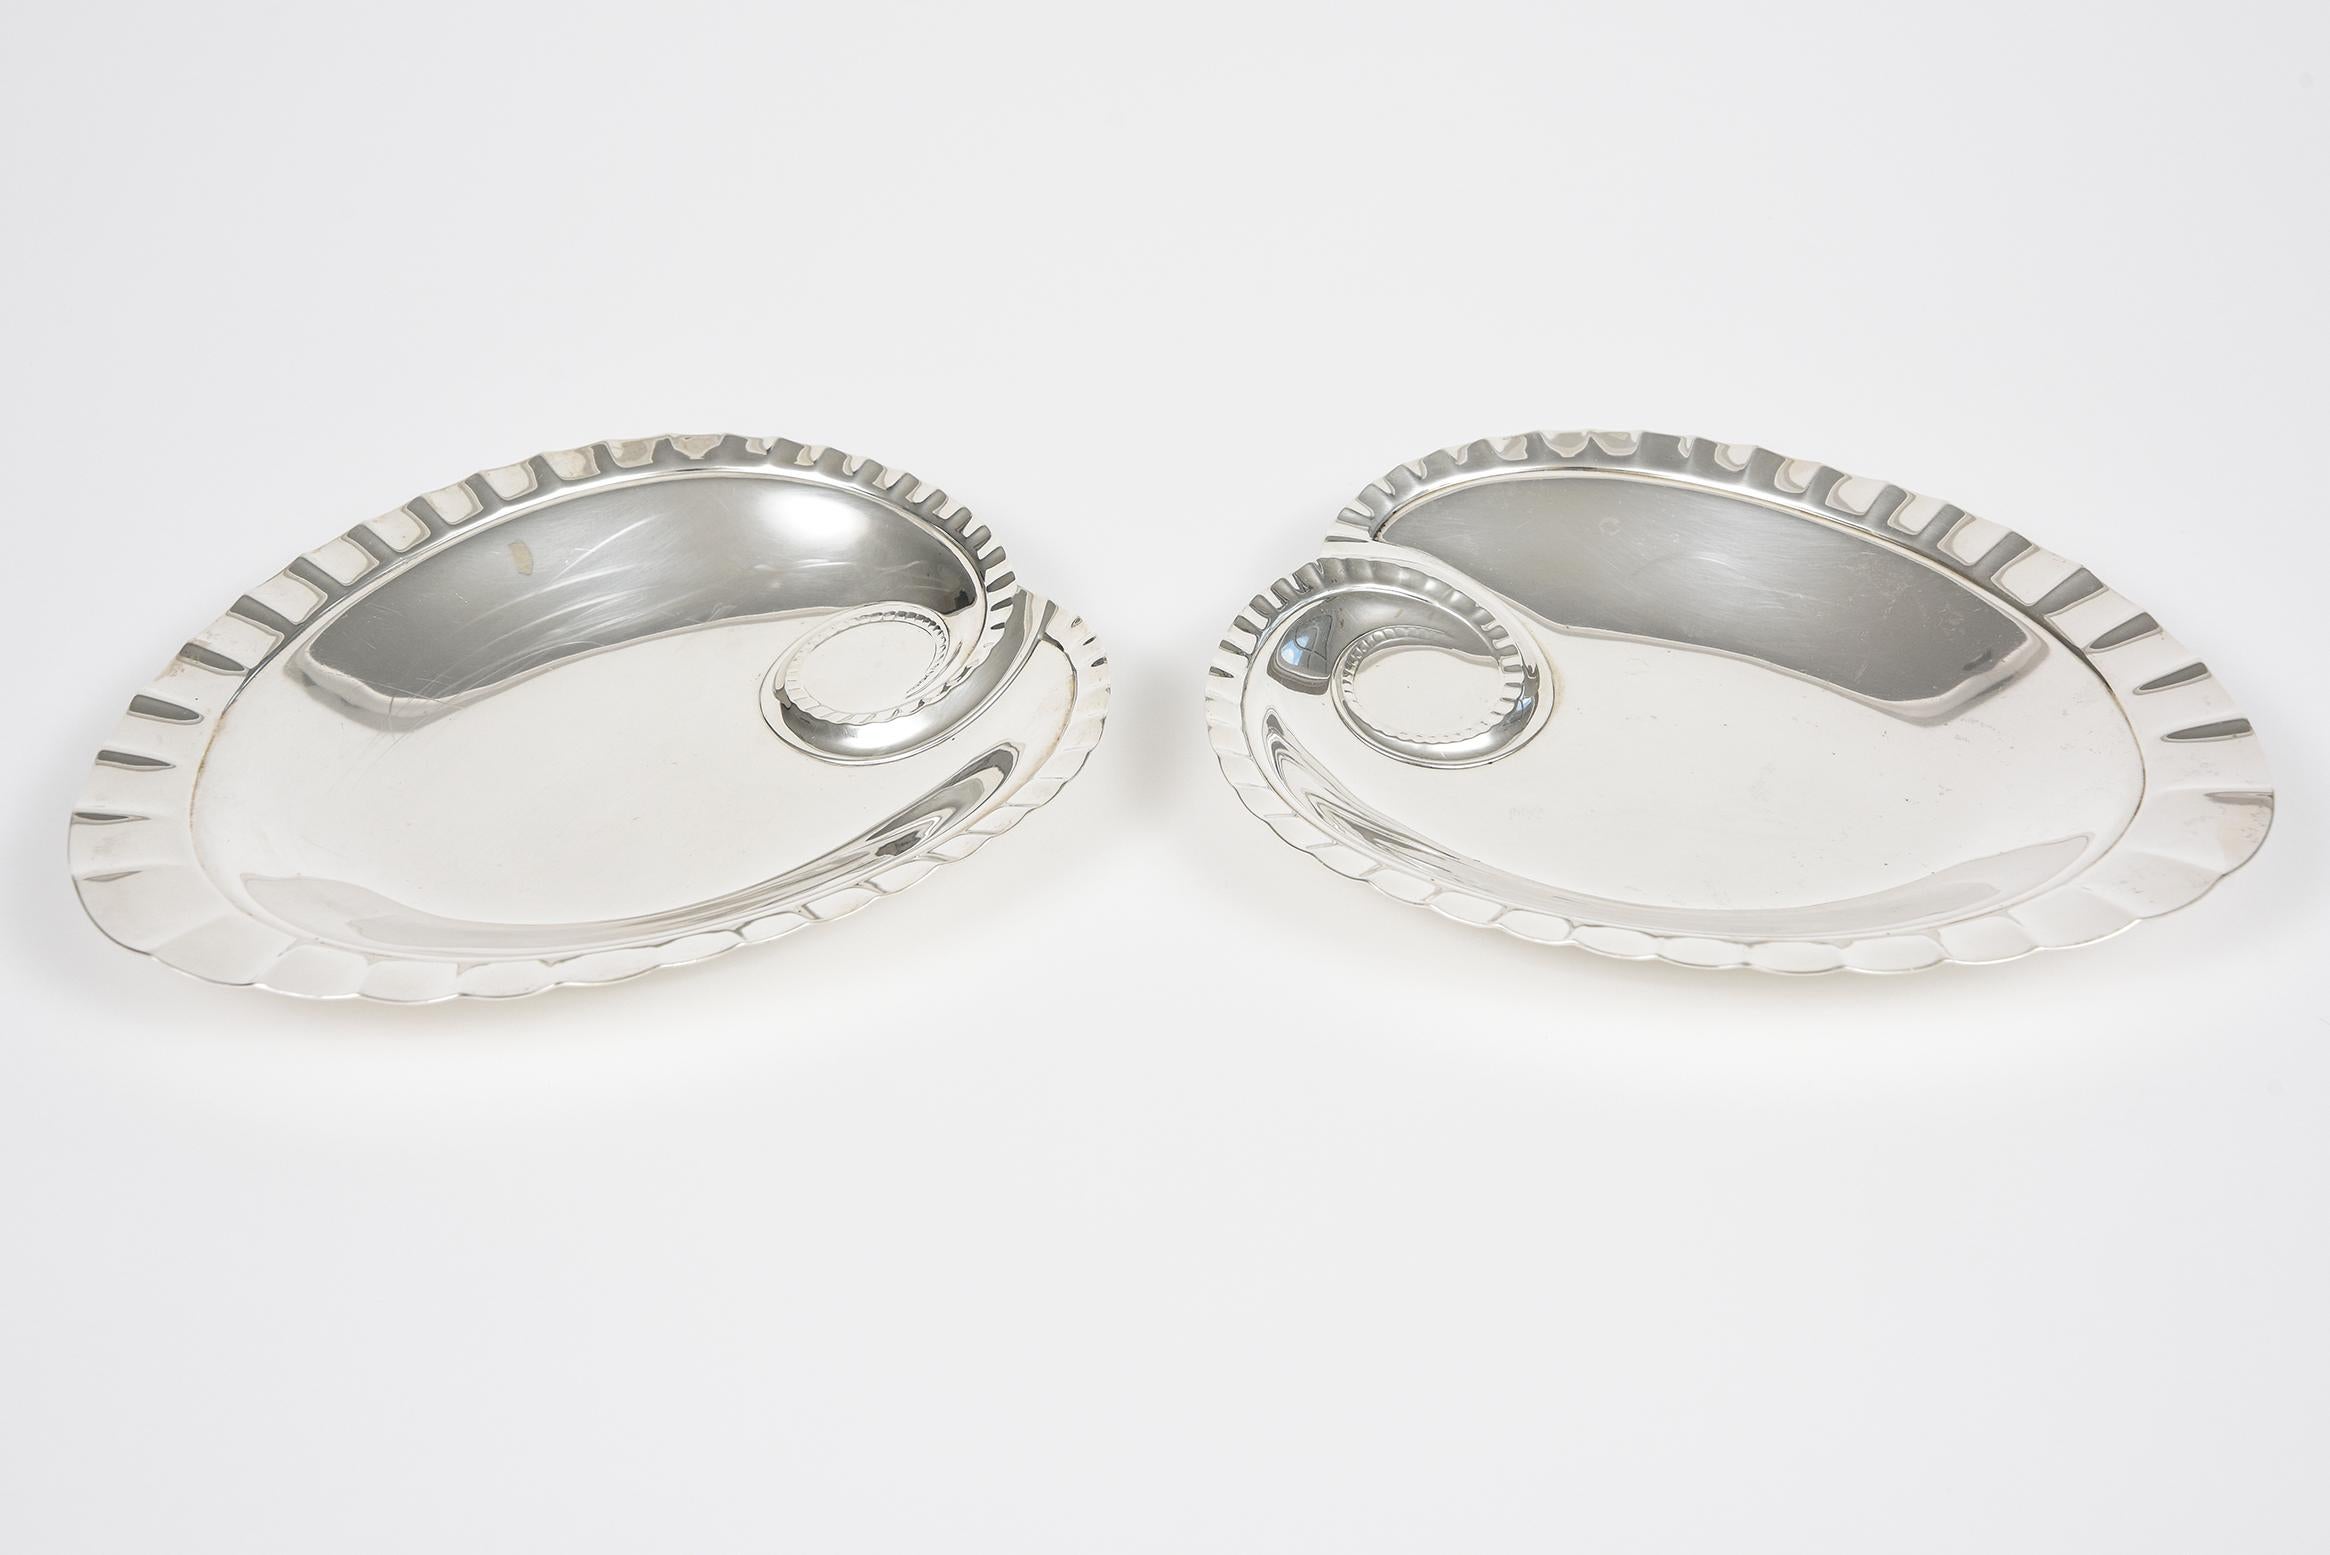 Pair of Tiffany & Co Makers sterling silver heart shaped candy dishes. They are both stamped Tiffany & Co Makers sterling and have an item number as well. Perfect for Valentine's Day, a wedding, anniversary or just to let someone know you love them.